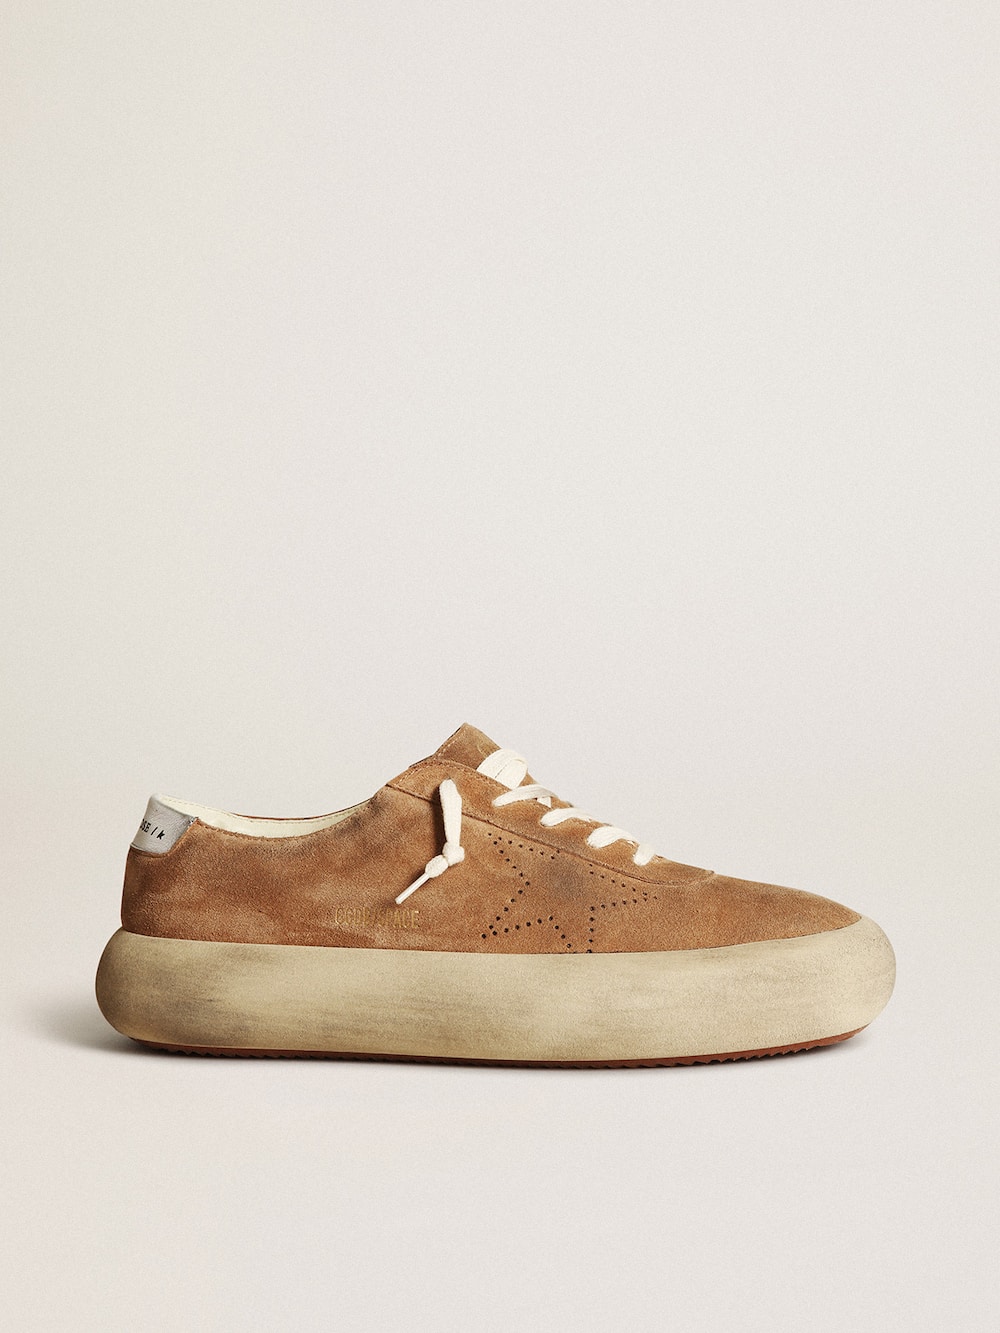 Golden Goose - Chaussures Space-Star homme en daim couleur tabac in 